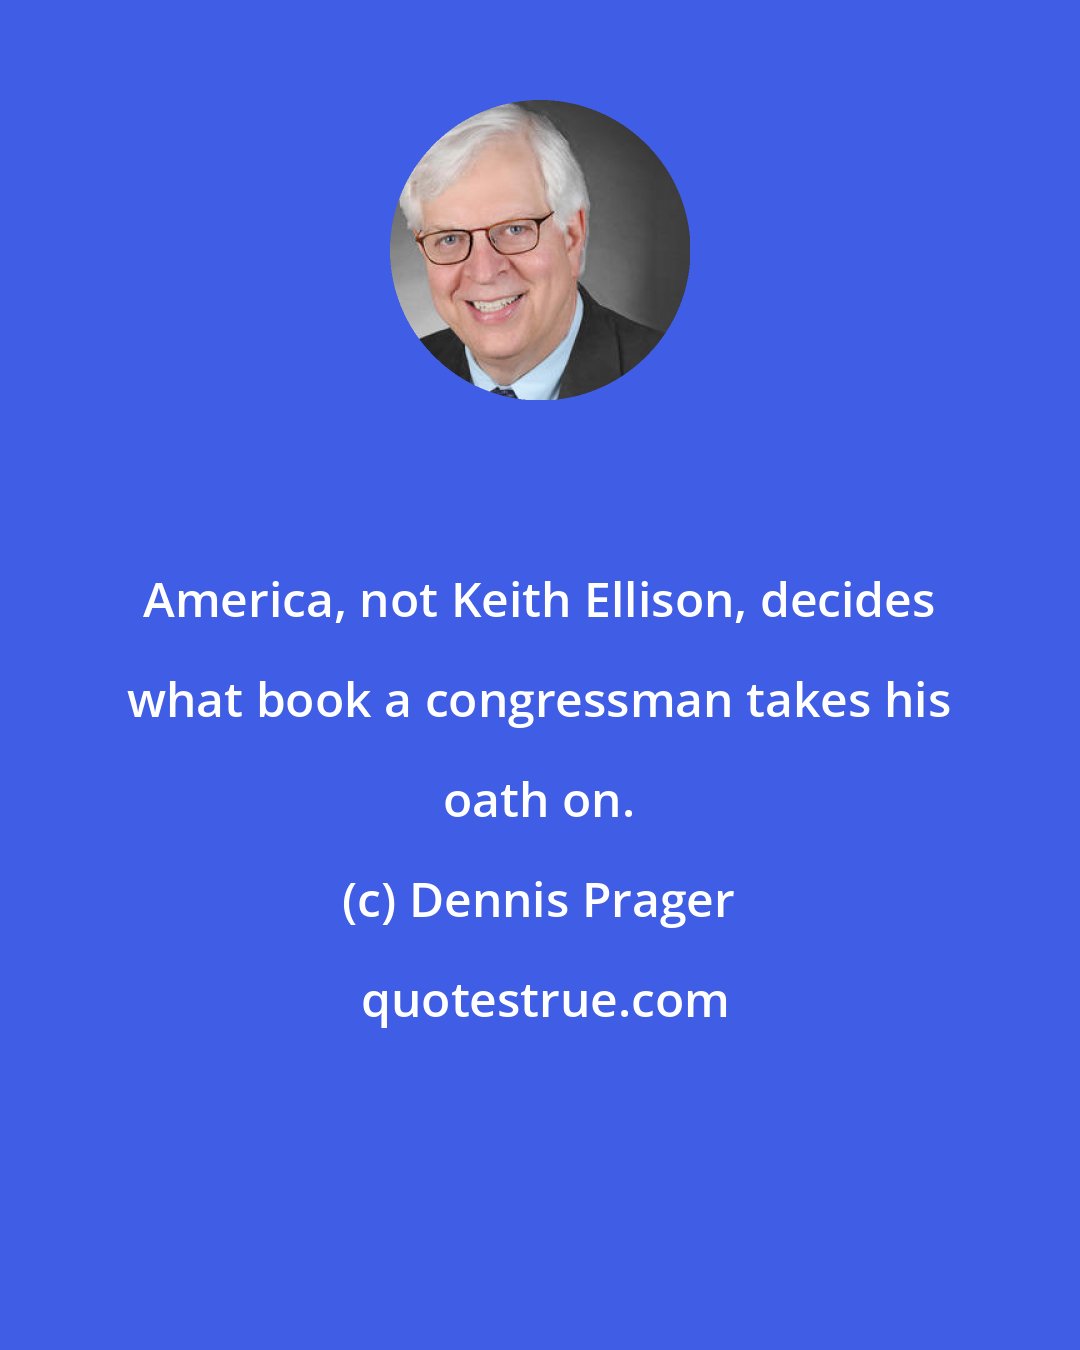 Dennis Prager: America, not Keith Ellison, decides what book a congressman takes his oath on.